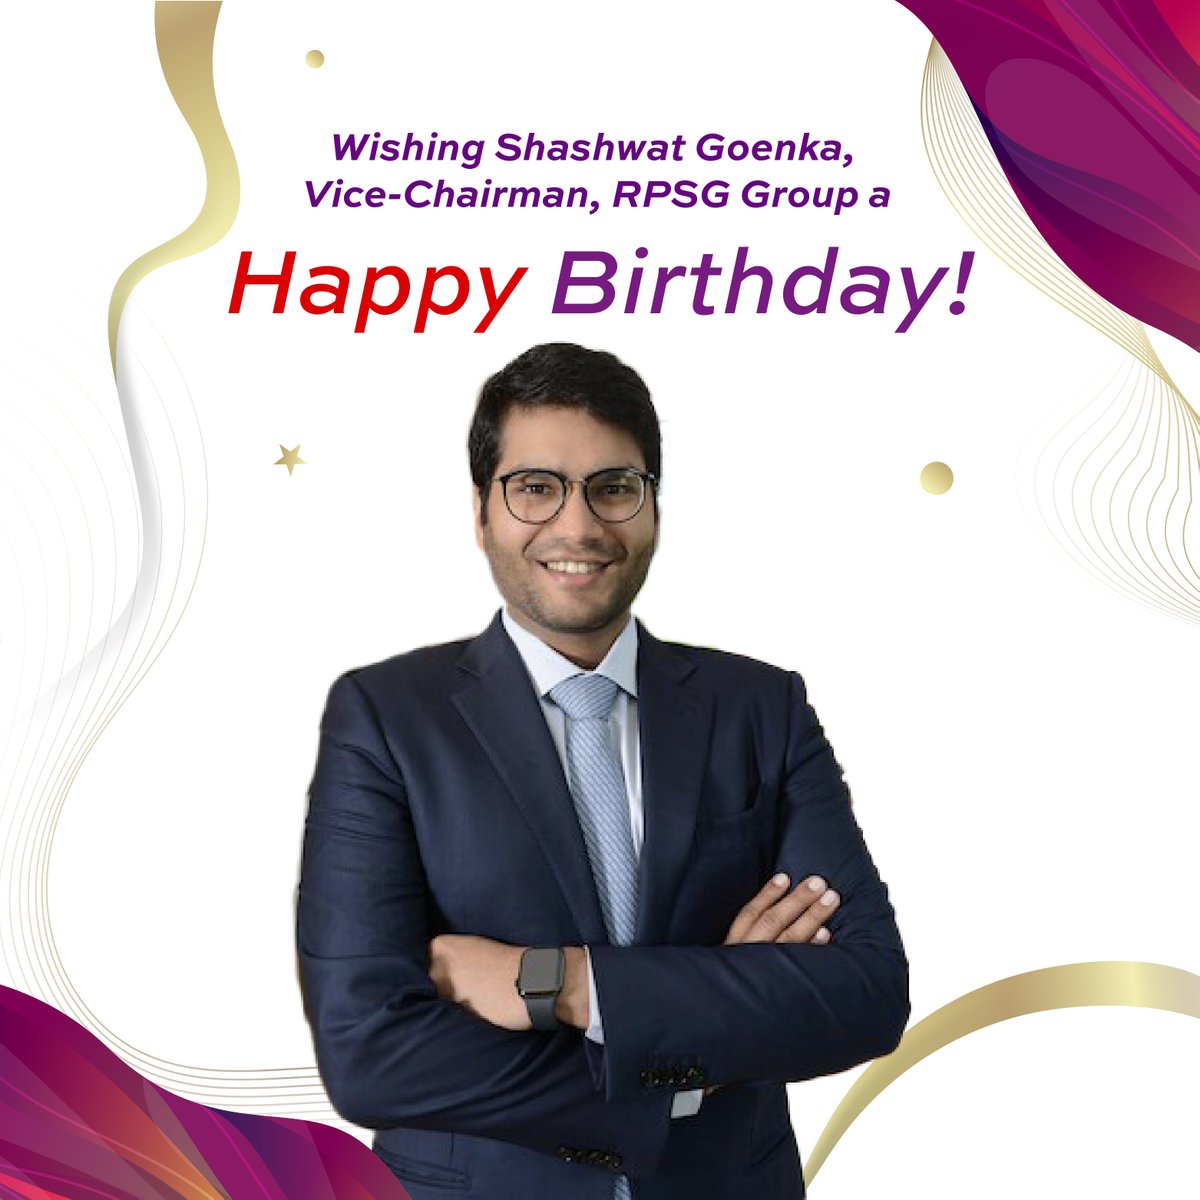 A very happy birthday to our Vice Chairman, Shashwat Goenka. Your relentless pursuit of excellence and innovation continues to inspire and drive us forward. Here’s to charting new horizons together! #BirthdayCelebrations #VisionaryLeadership #BusinessIndia #BusinessExcellence